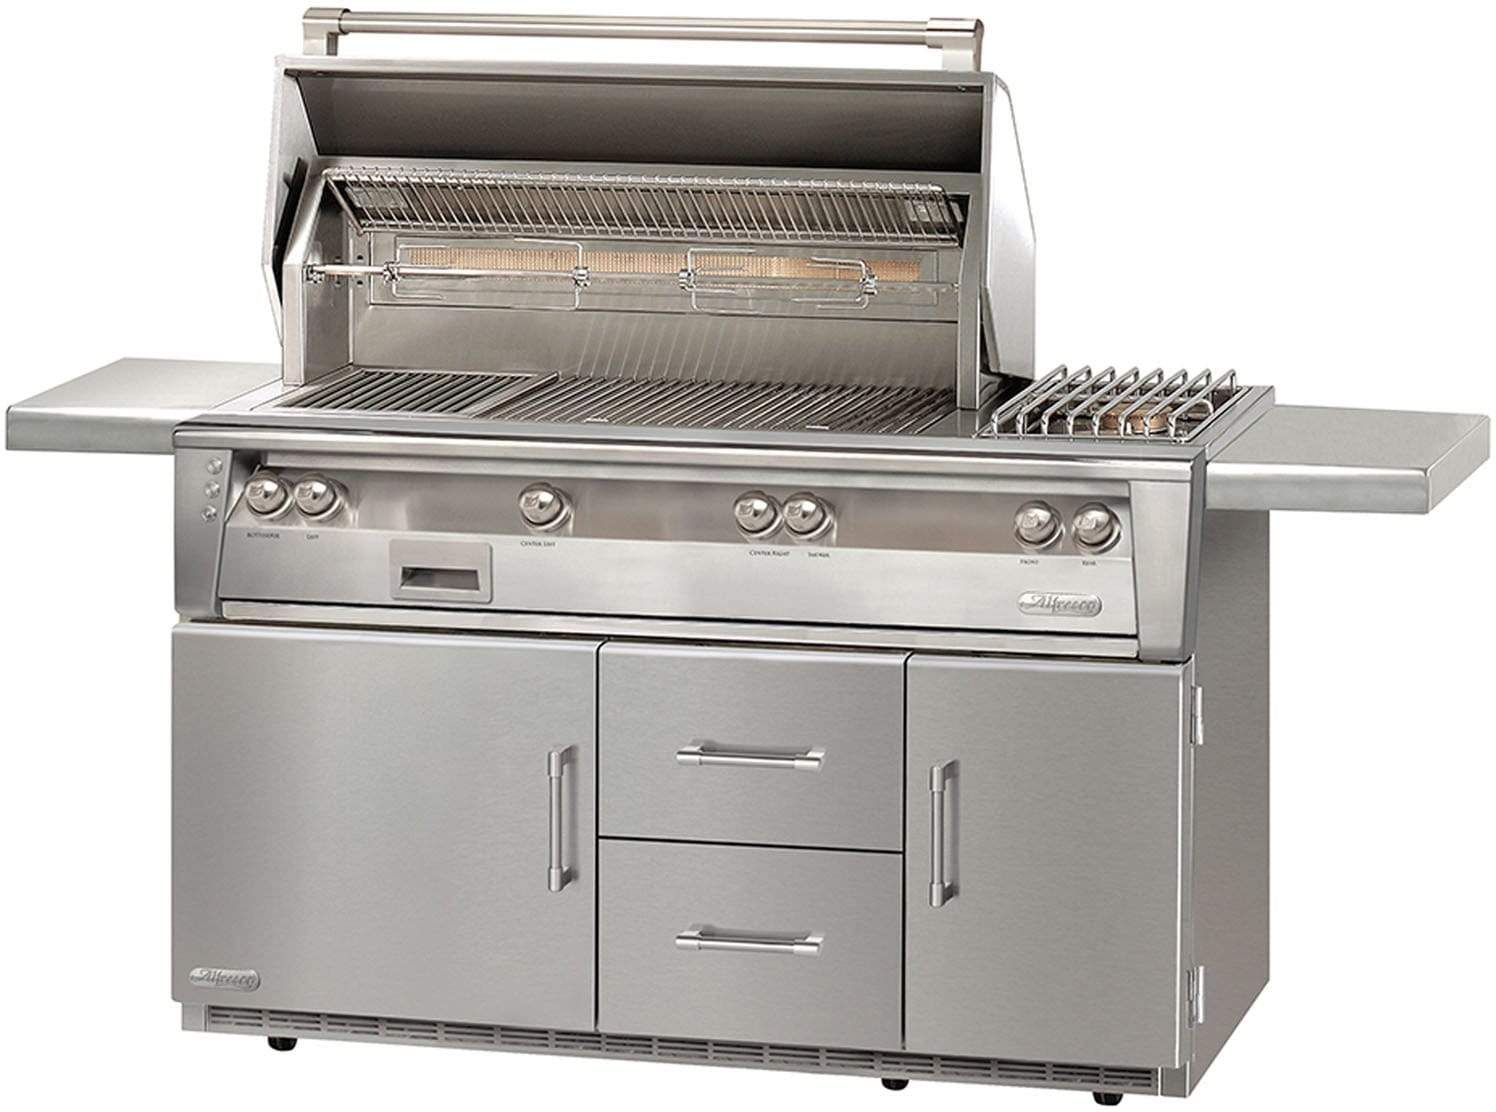 Alfresco Grills Natural Gas Alfesco 56 Inch Grill with&nbsp; Grilling Surface, Three&nbsp; Main Burners, Infrared Sear Zone, Side Burner, Integrated Rotisserie, Smoker and Herb Infuser System, 3-Position Warming Rack, Halogen Lighting and Refrigerated Cart: